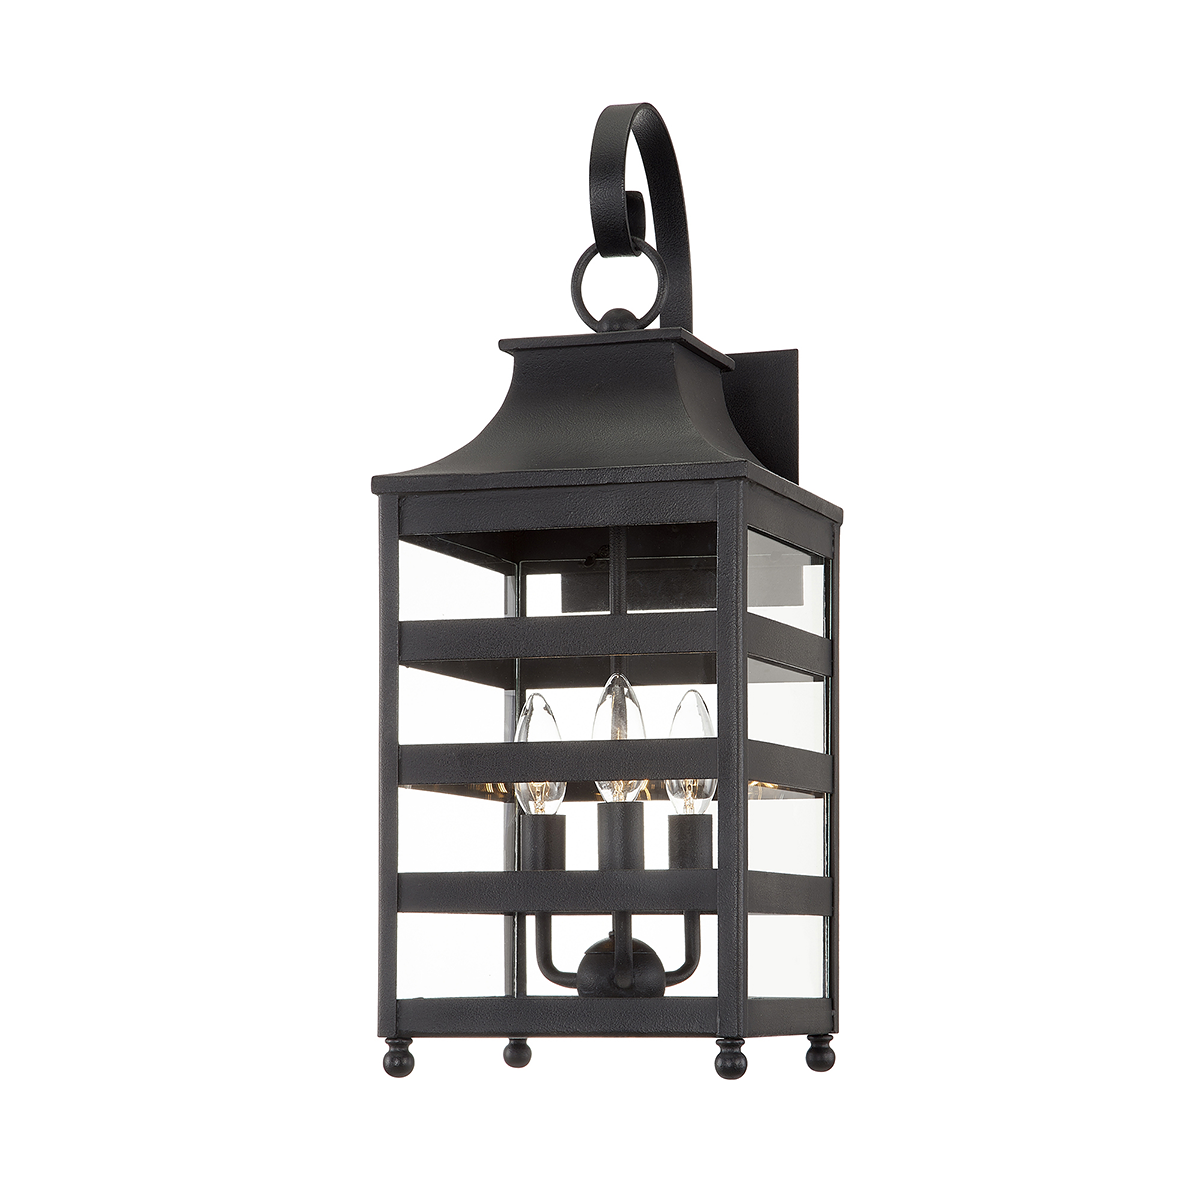 Troy Lighting HOLSTROM 3LT WALL B7432 Outdoor l Wall Troy Lighting FORGED IRON  